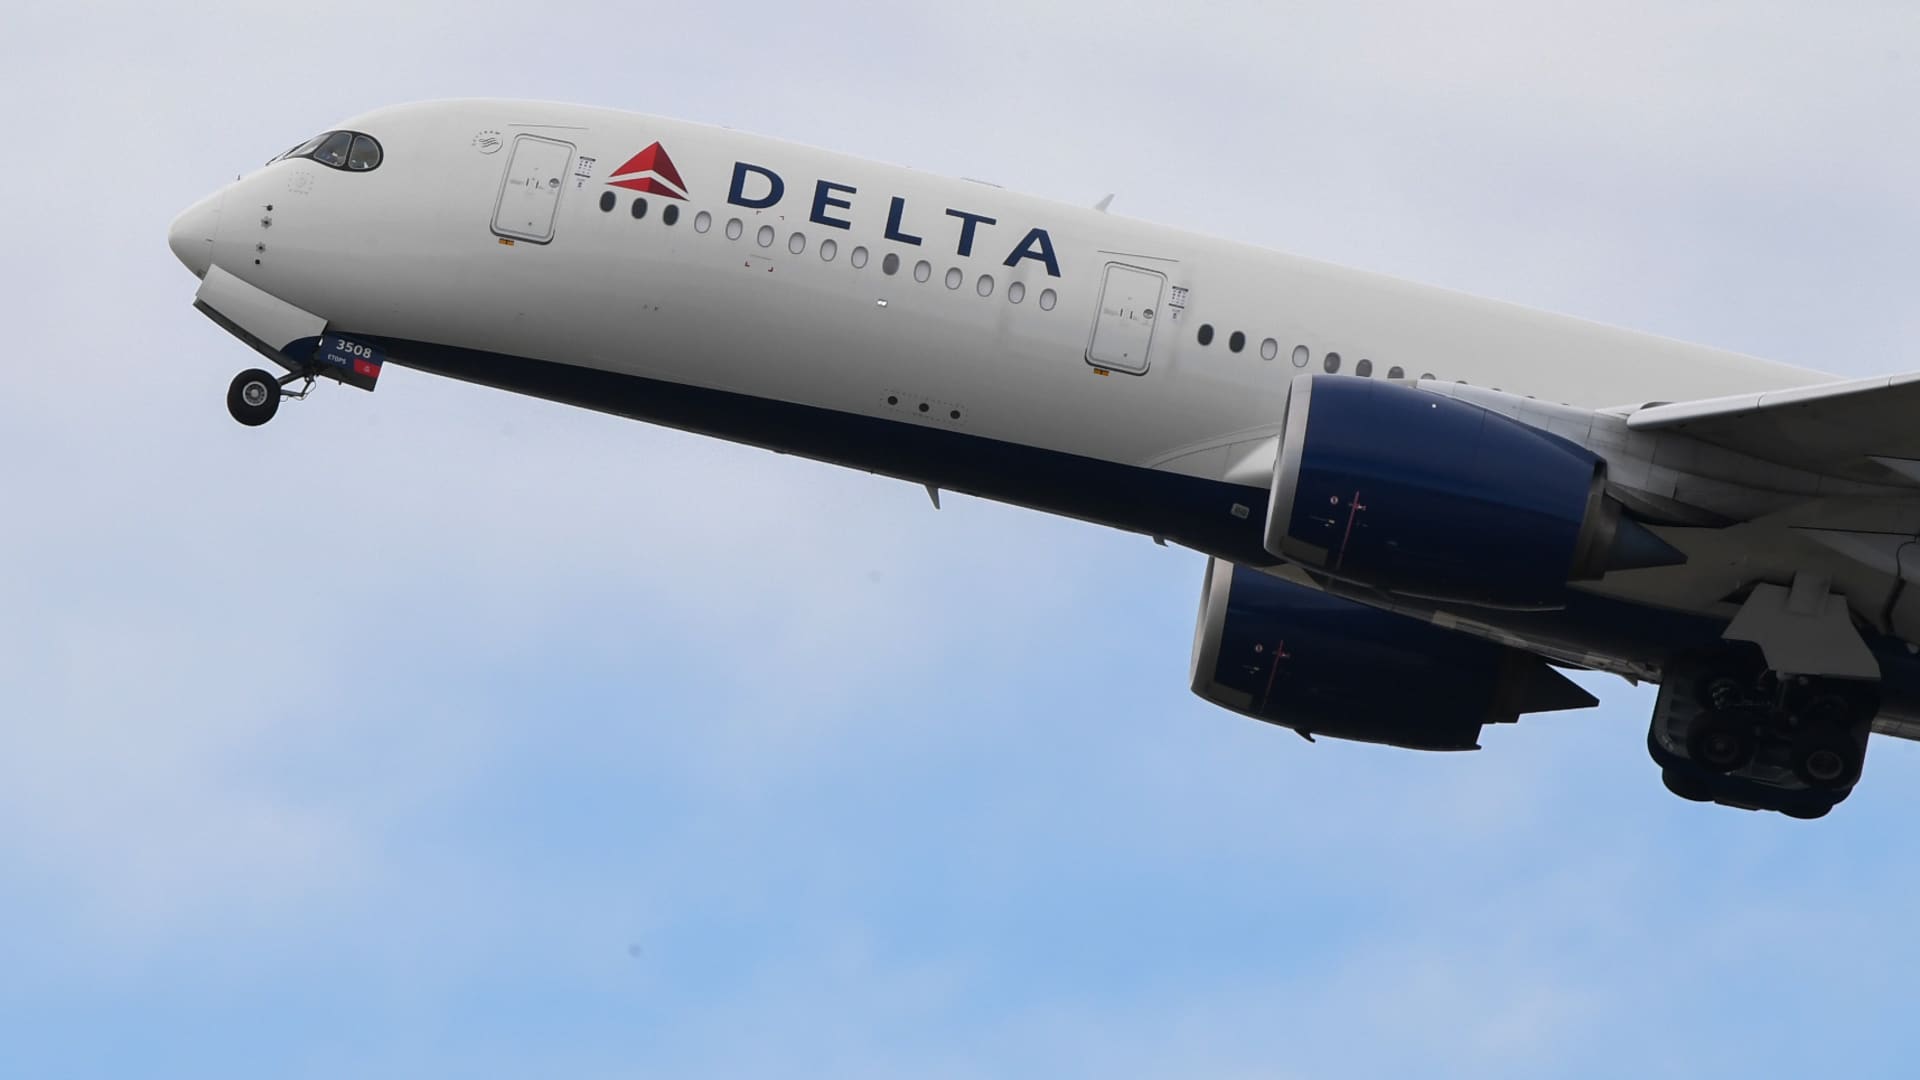 Delta Air Lines (DAL) Q1 2022 earnings